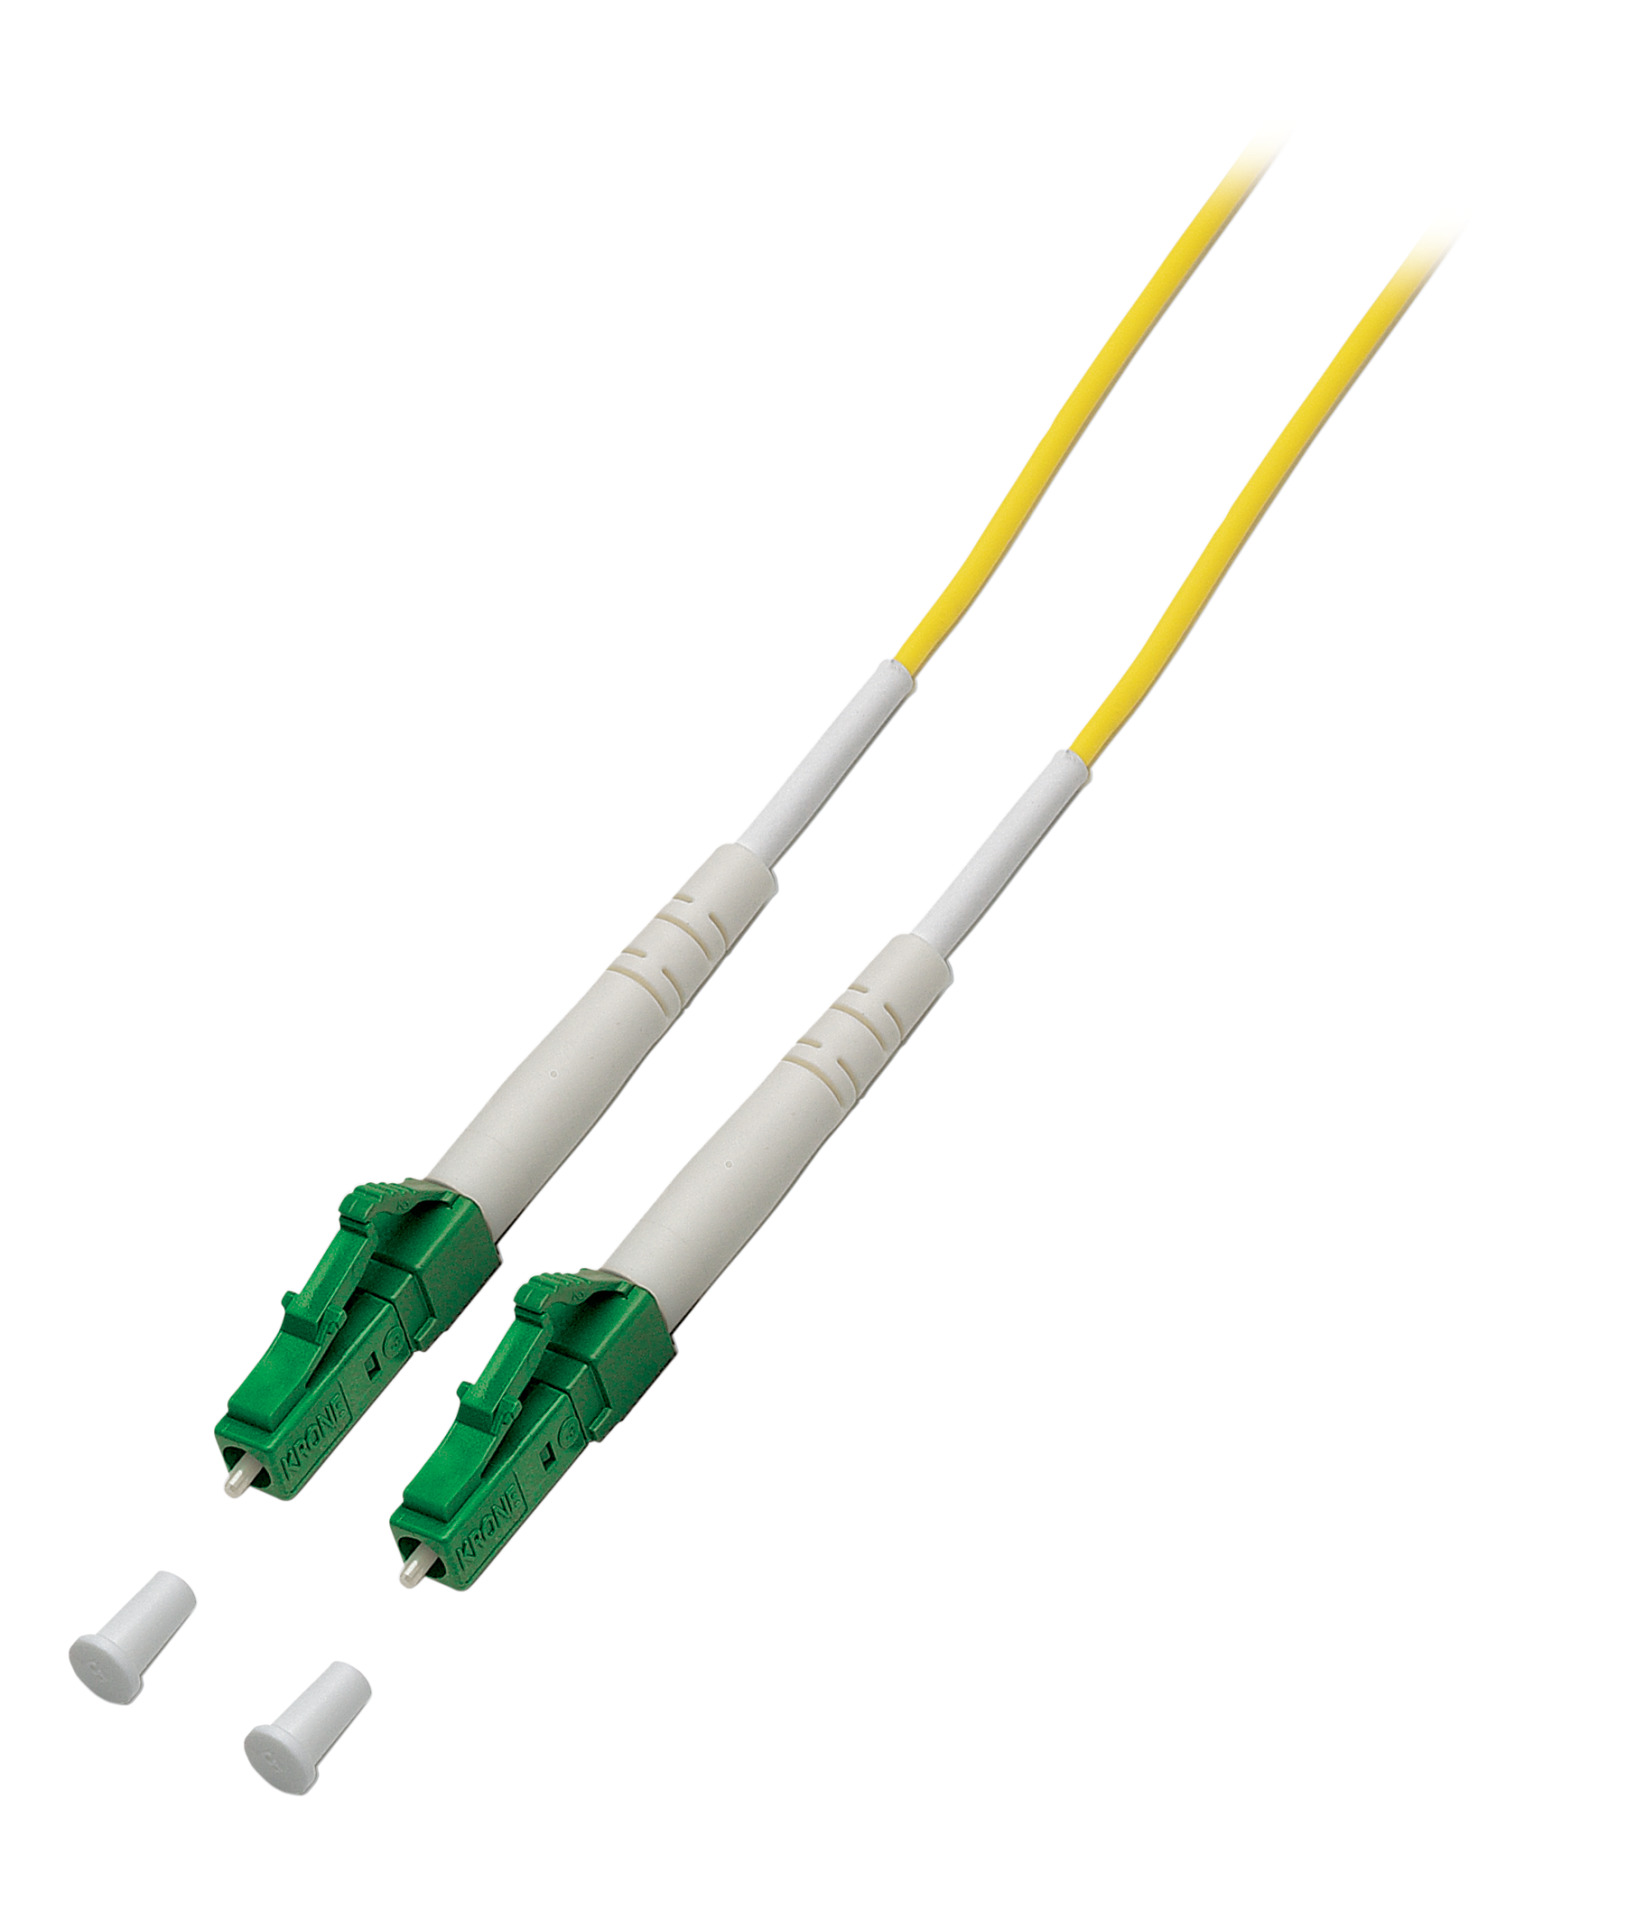 Simplex FO Patch Cable LC/APC-LC/APC G657.A2 3m 3,0mm yellow 9/125µm